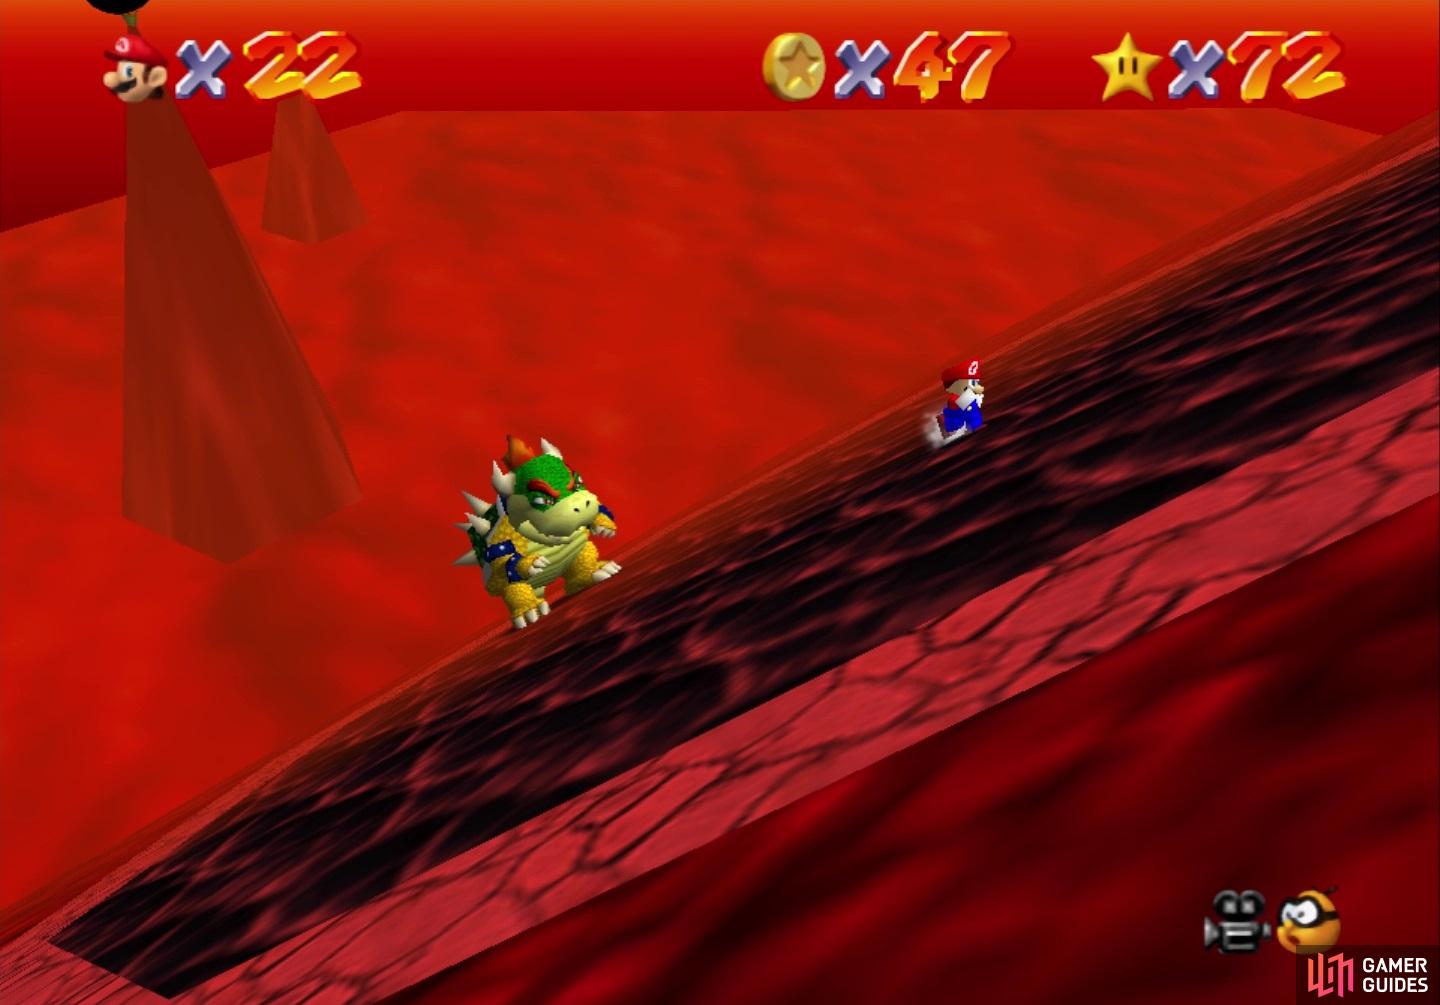 Bowser will tilt the entire platform throughout this fight